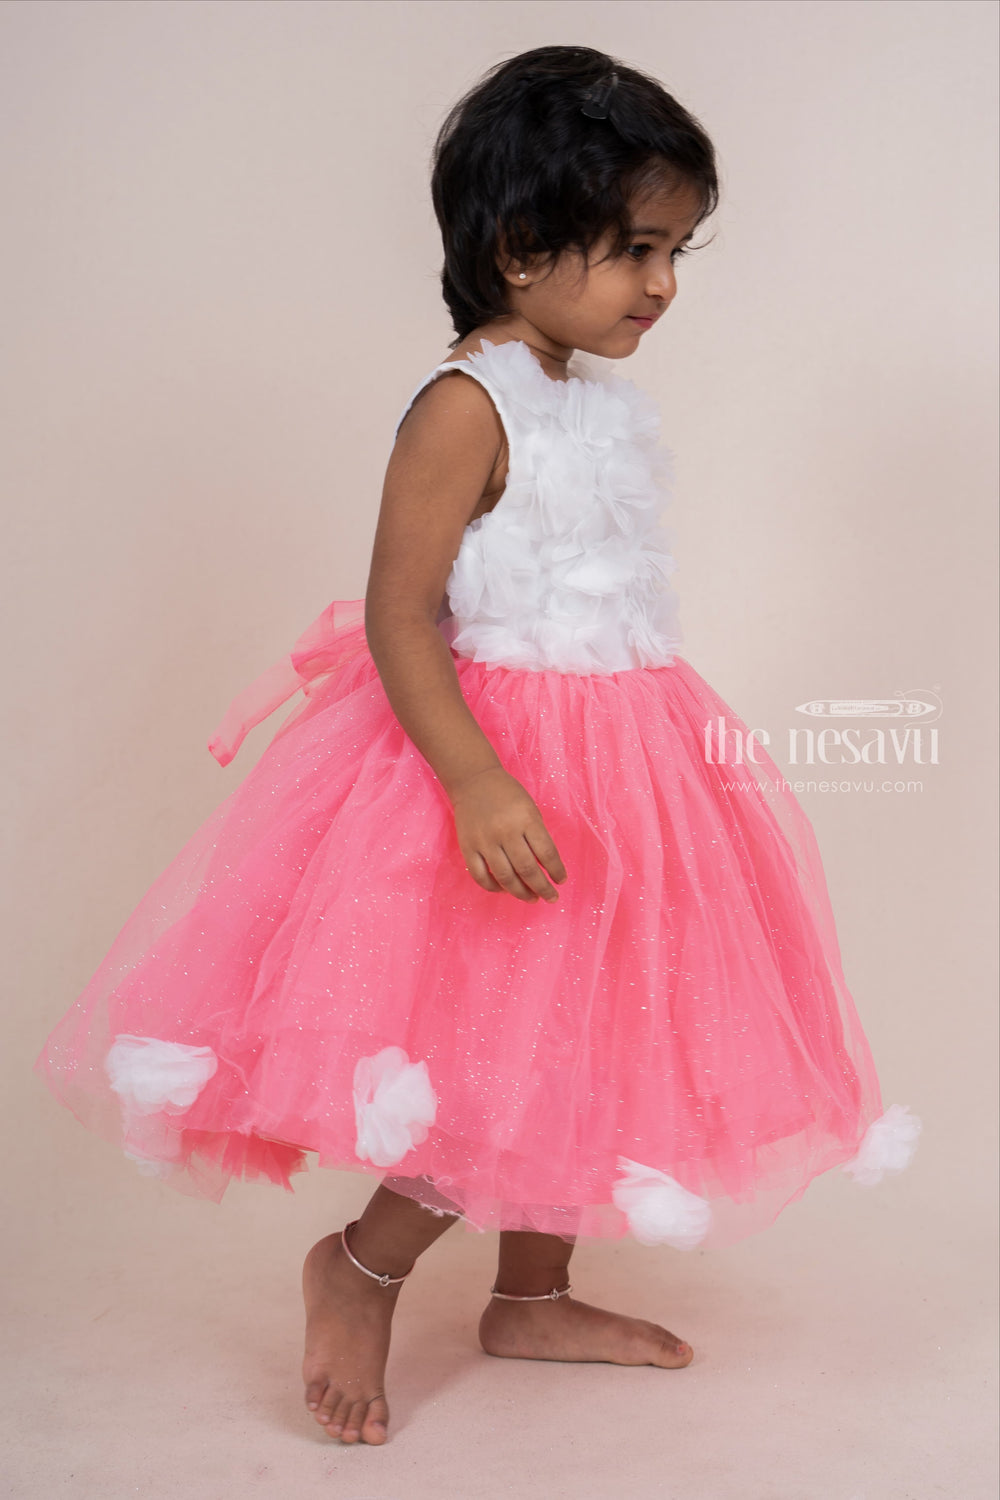 The Nesavu Party Frock Dark Pink With White Floral Embellished Party Frock For Baby Girls psr silks Nesavu